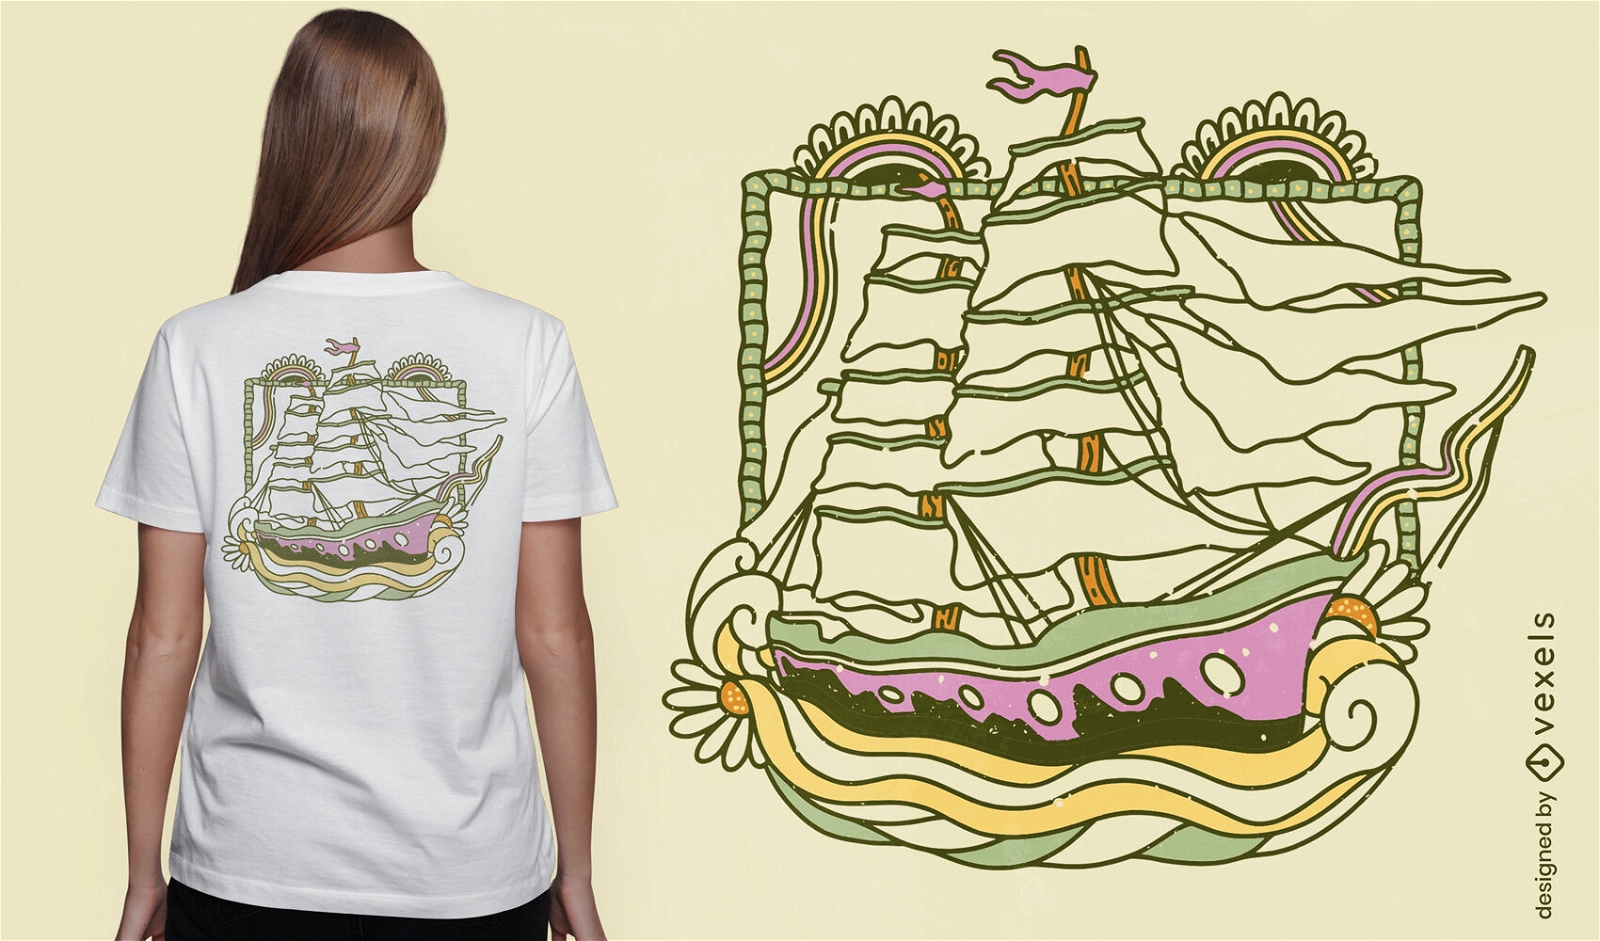 The Star of India old ship t-shirt design